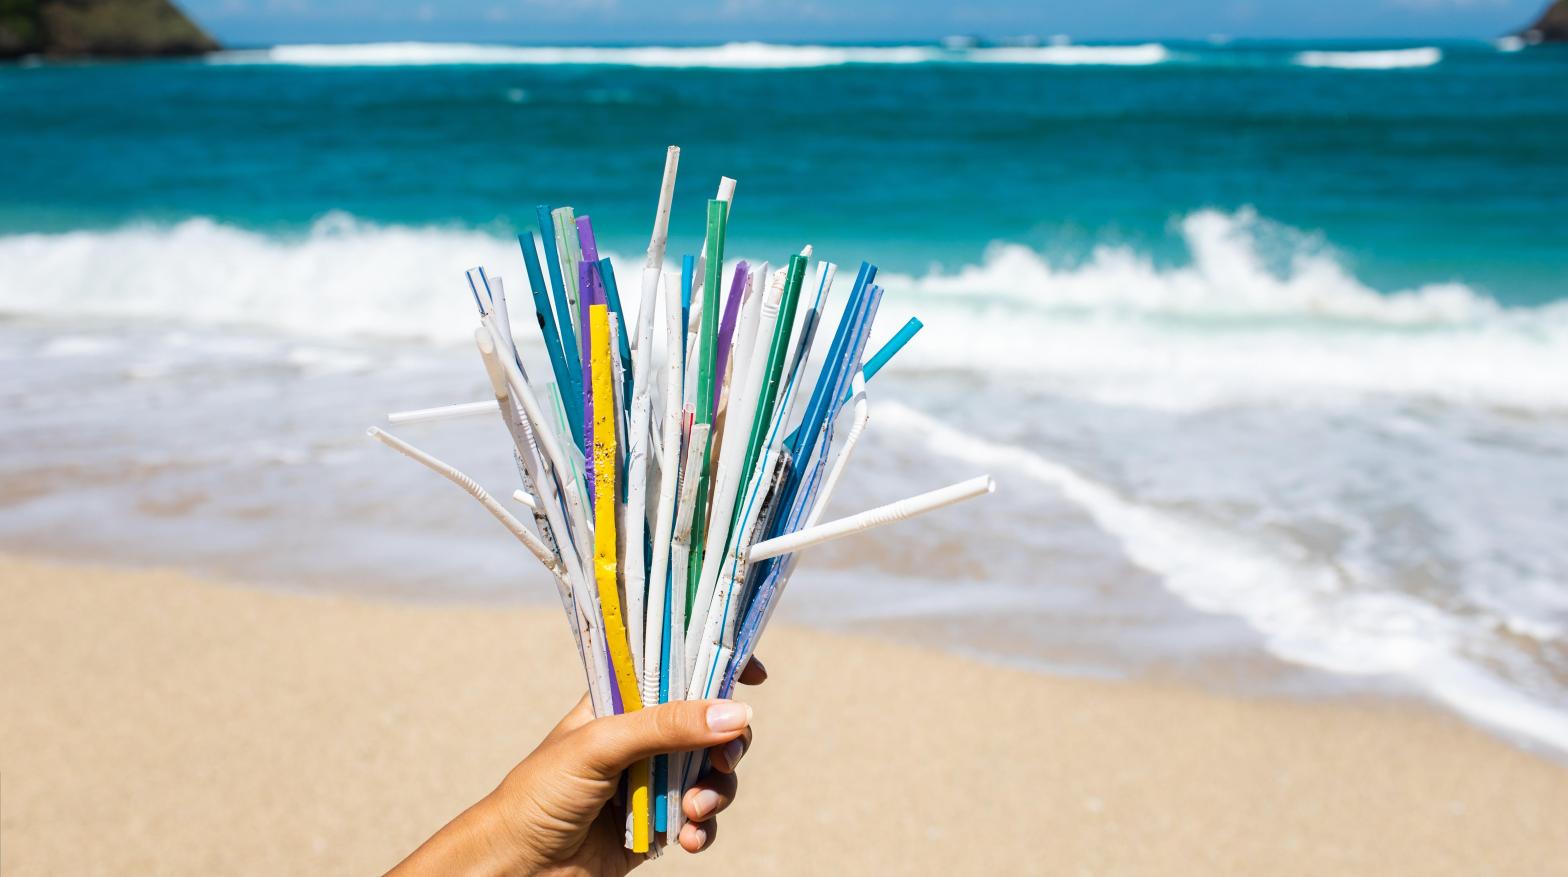 Traditional plastic is made with crude oil or natural gas, but bioplastic might not be the safest alternative.  (Image: Breslavtsev Oleg, Shutterstock)